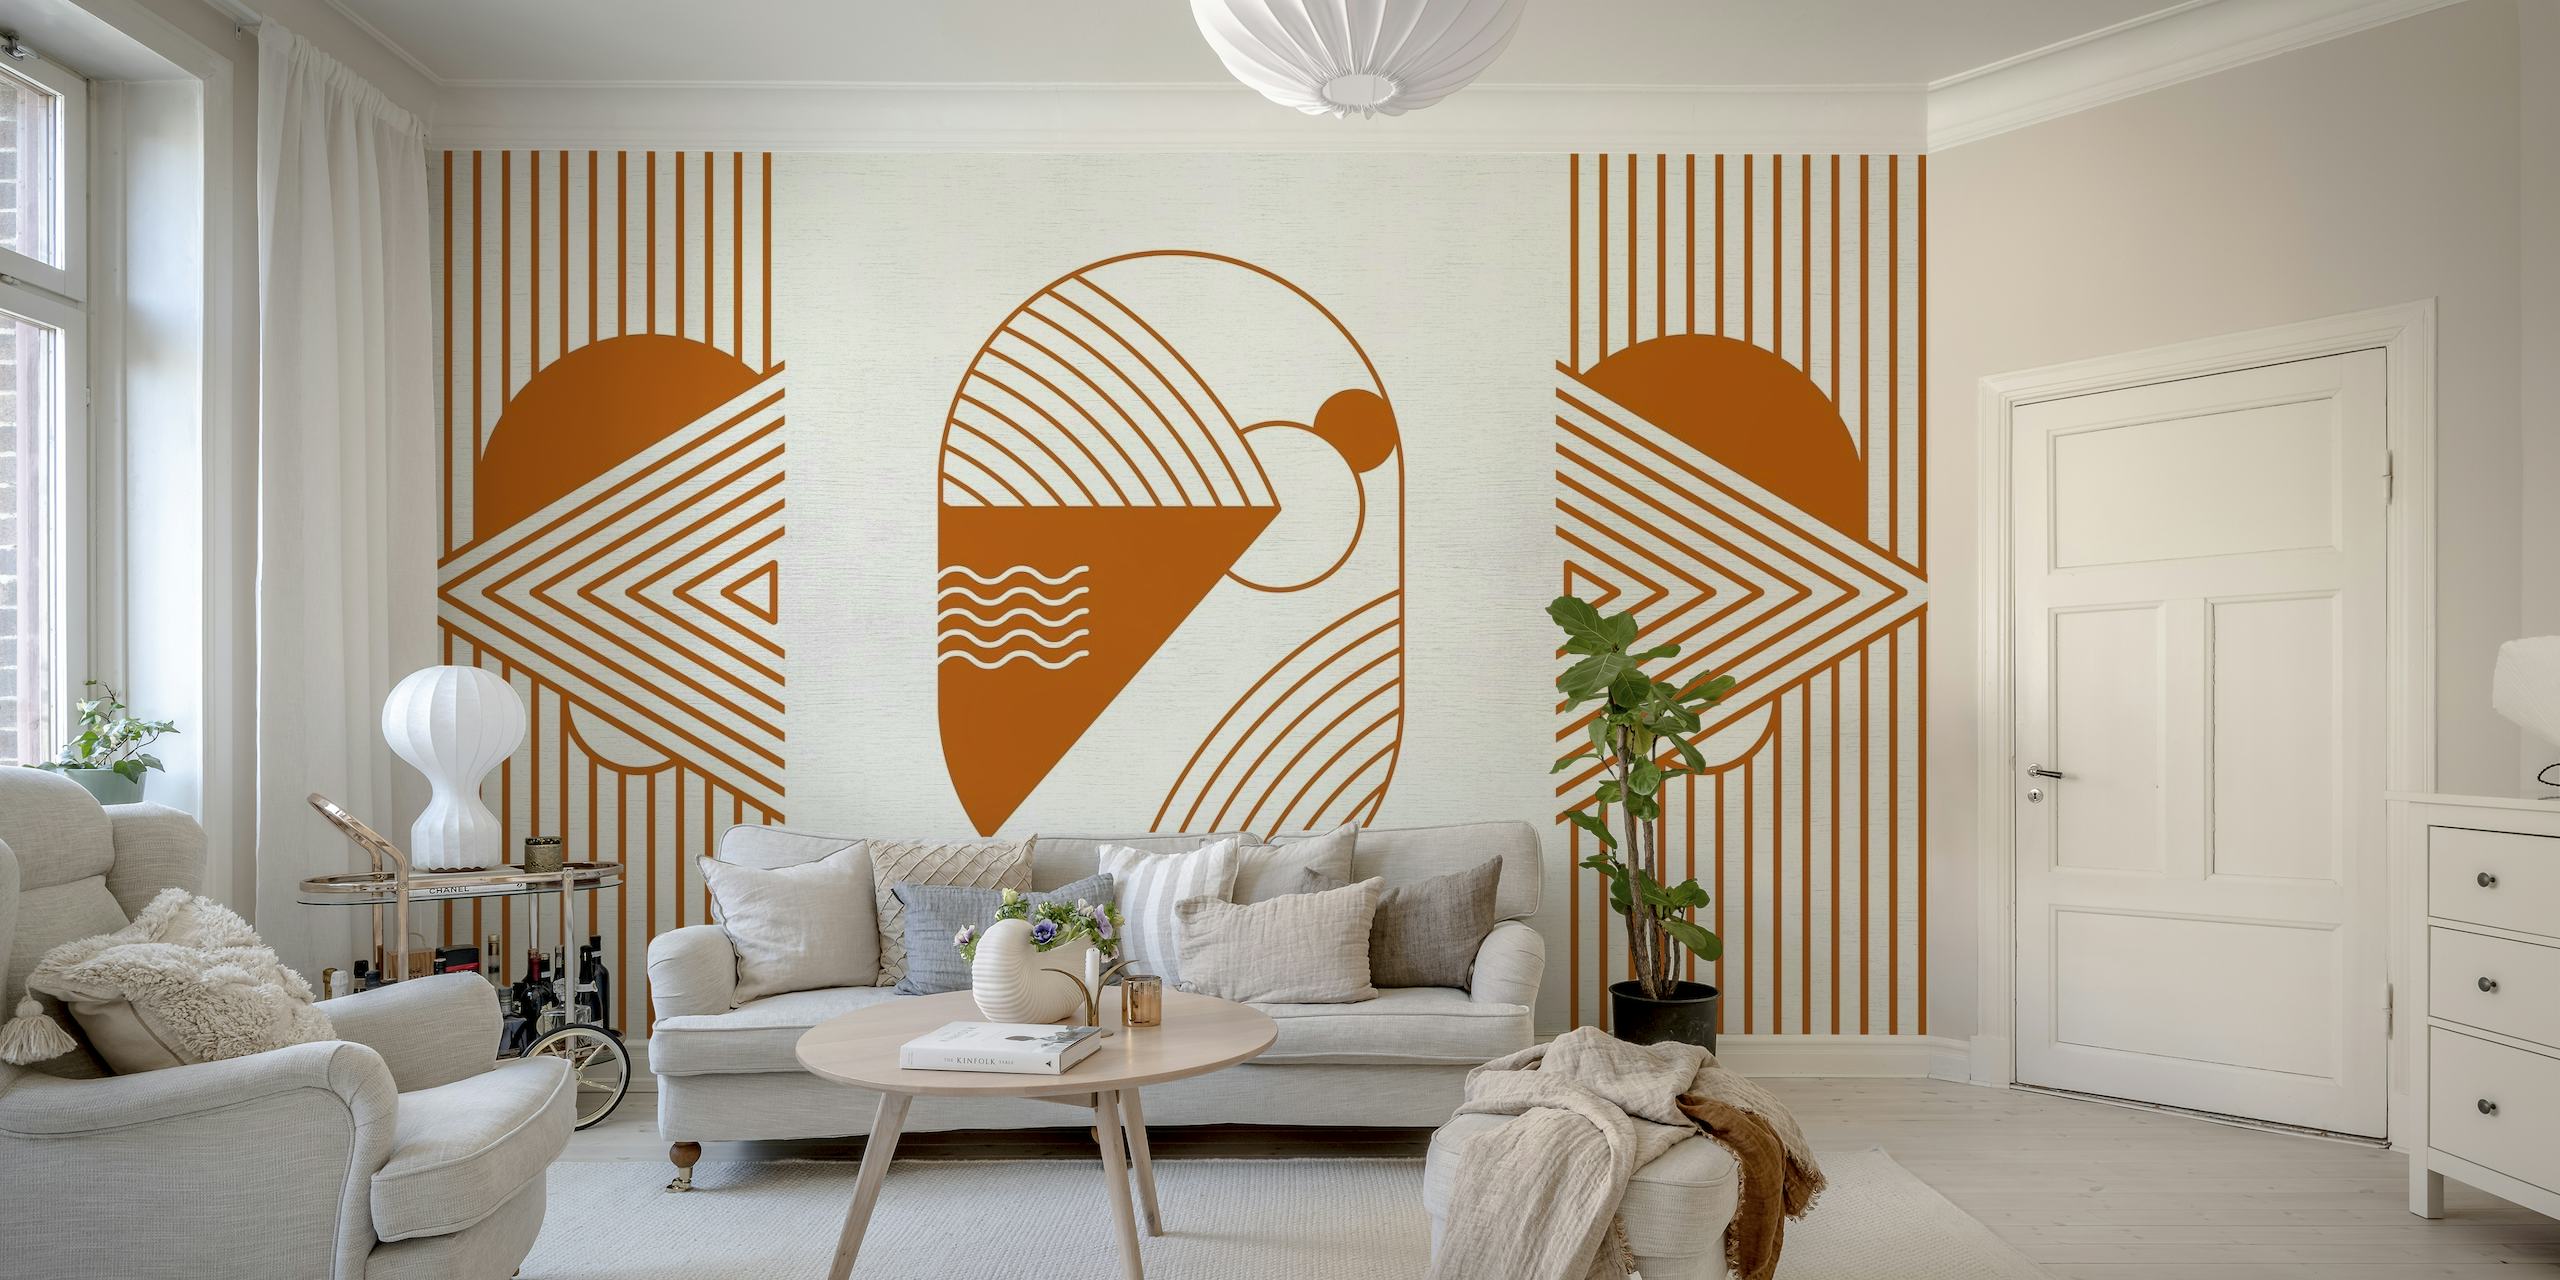 Retro-inspired cosmic dream explorer wall mural in orange rust tones with geometric shapes and space motifs.